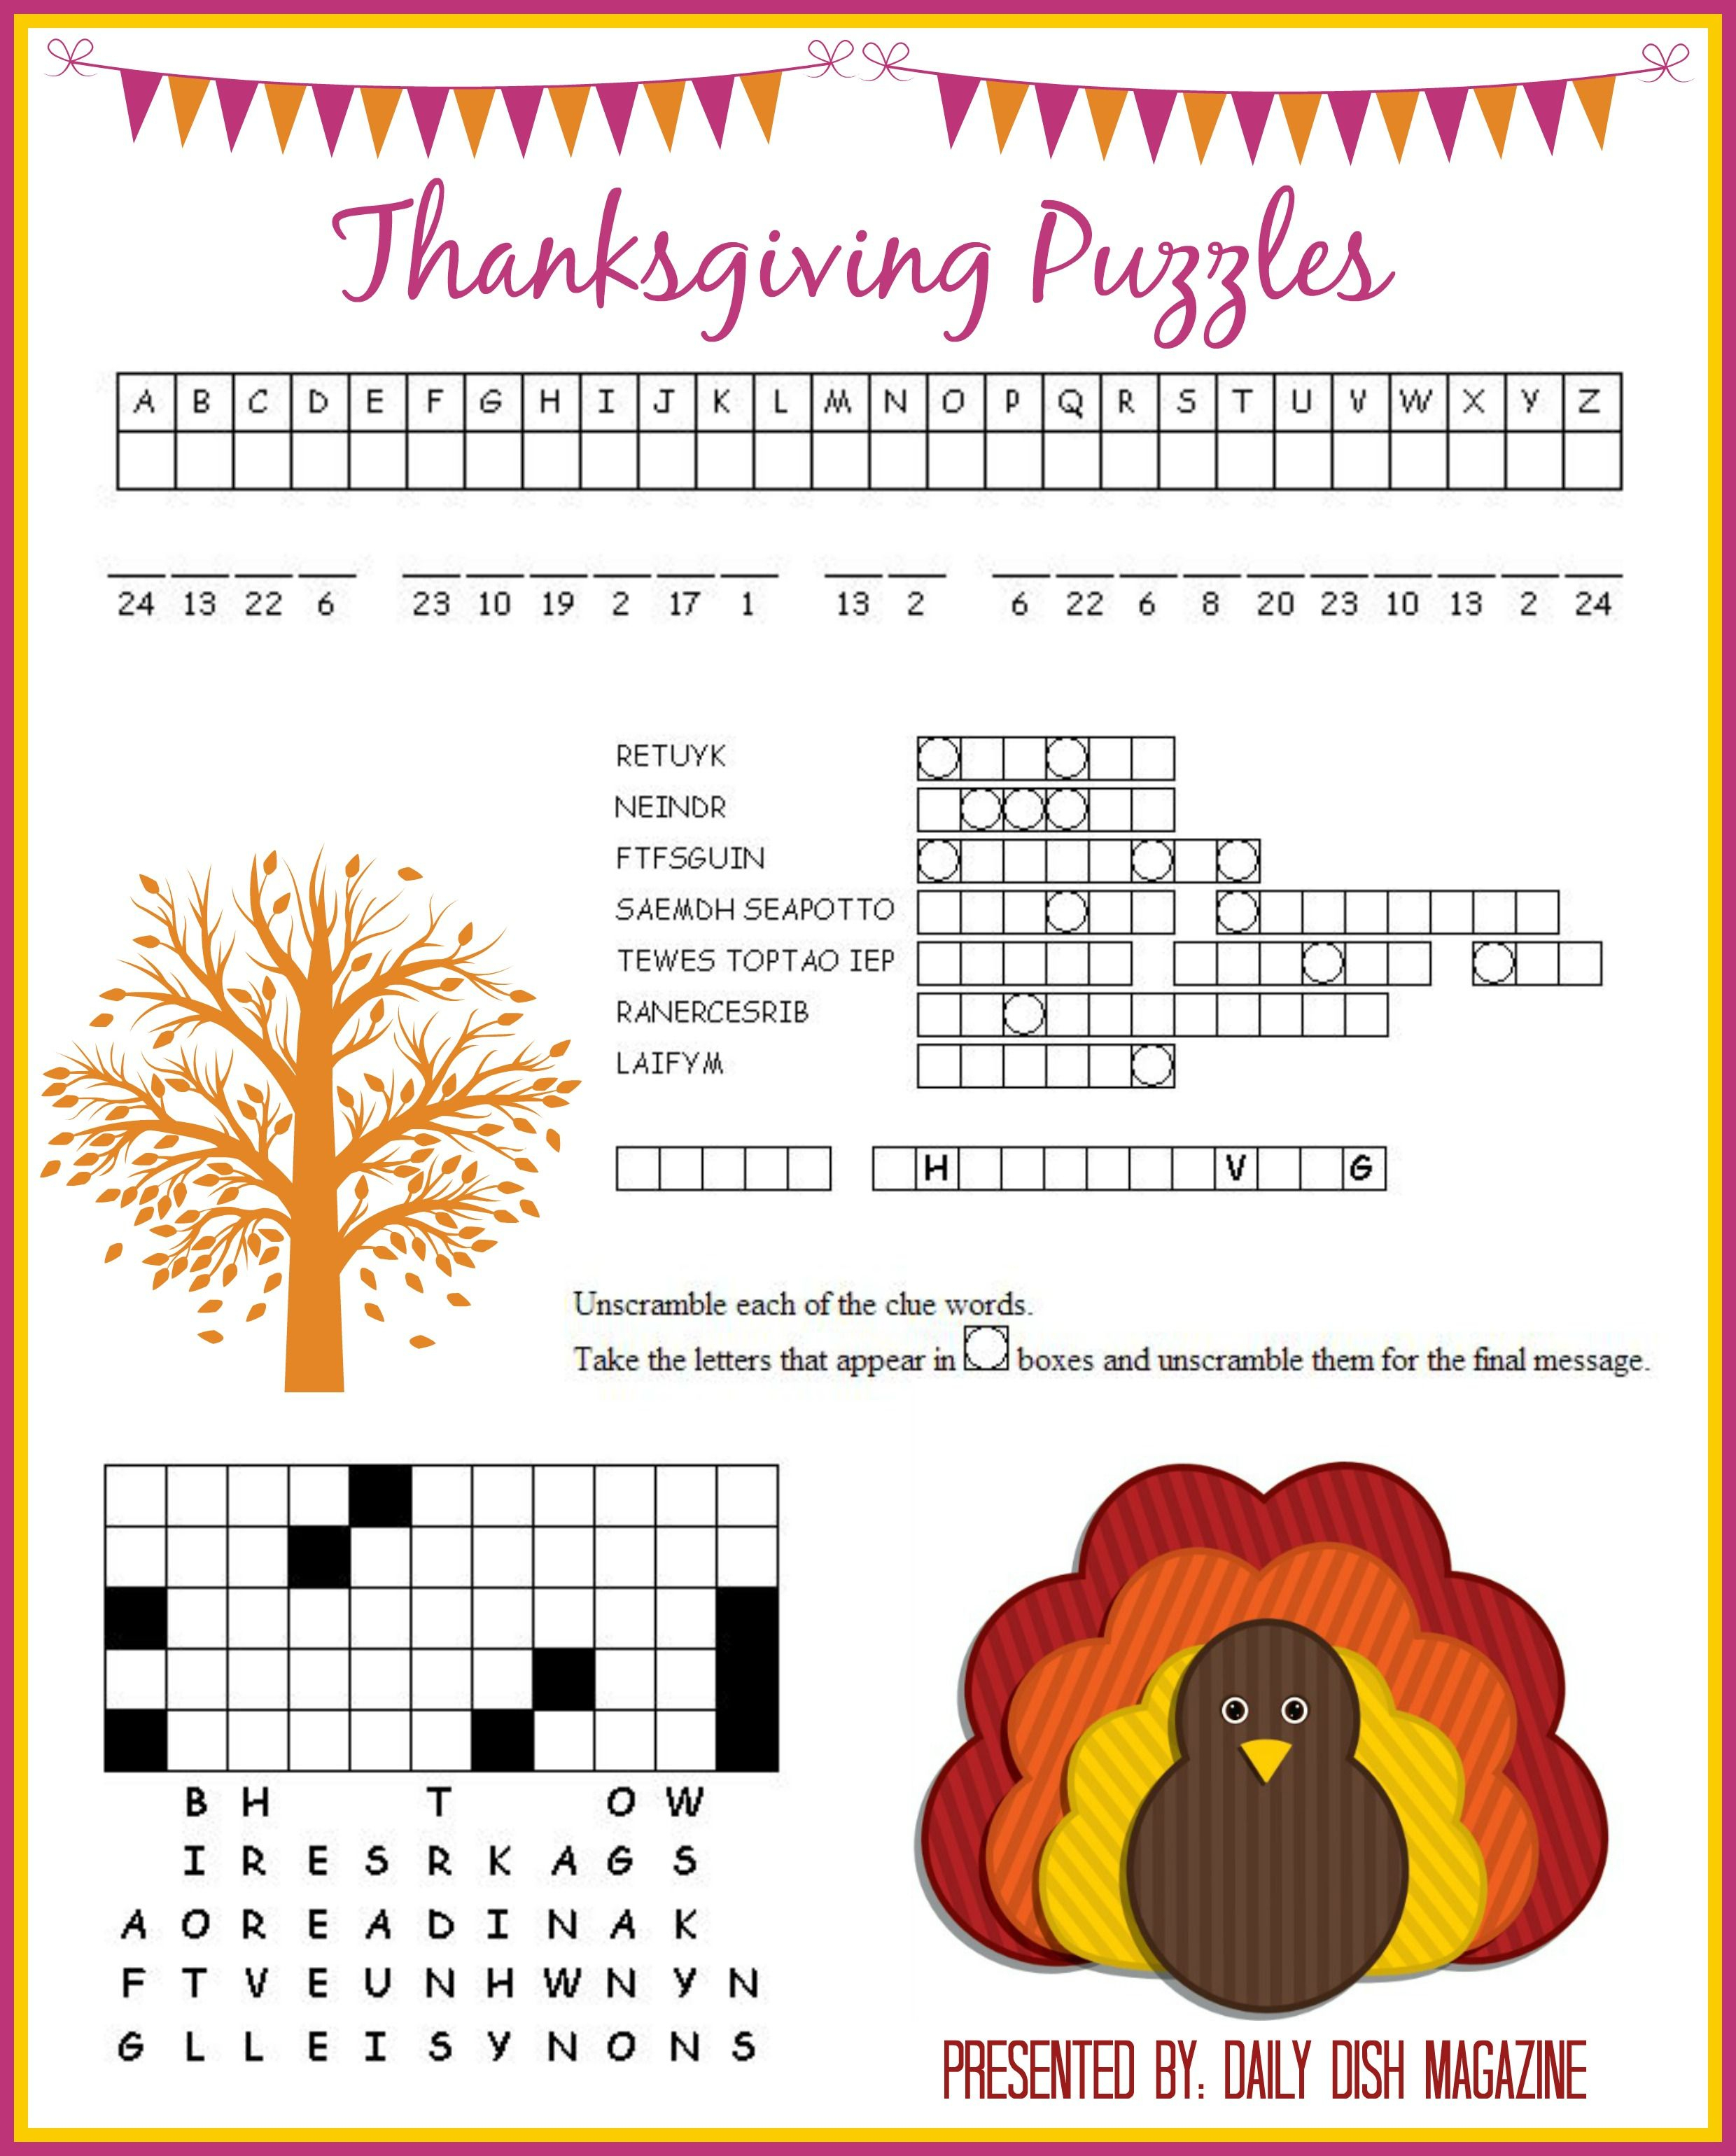 Thanksgiving Puzzles Printables | *holidays We Celebrate - Thanksgiving Crossword Puzzles Printable Free